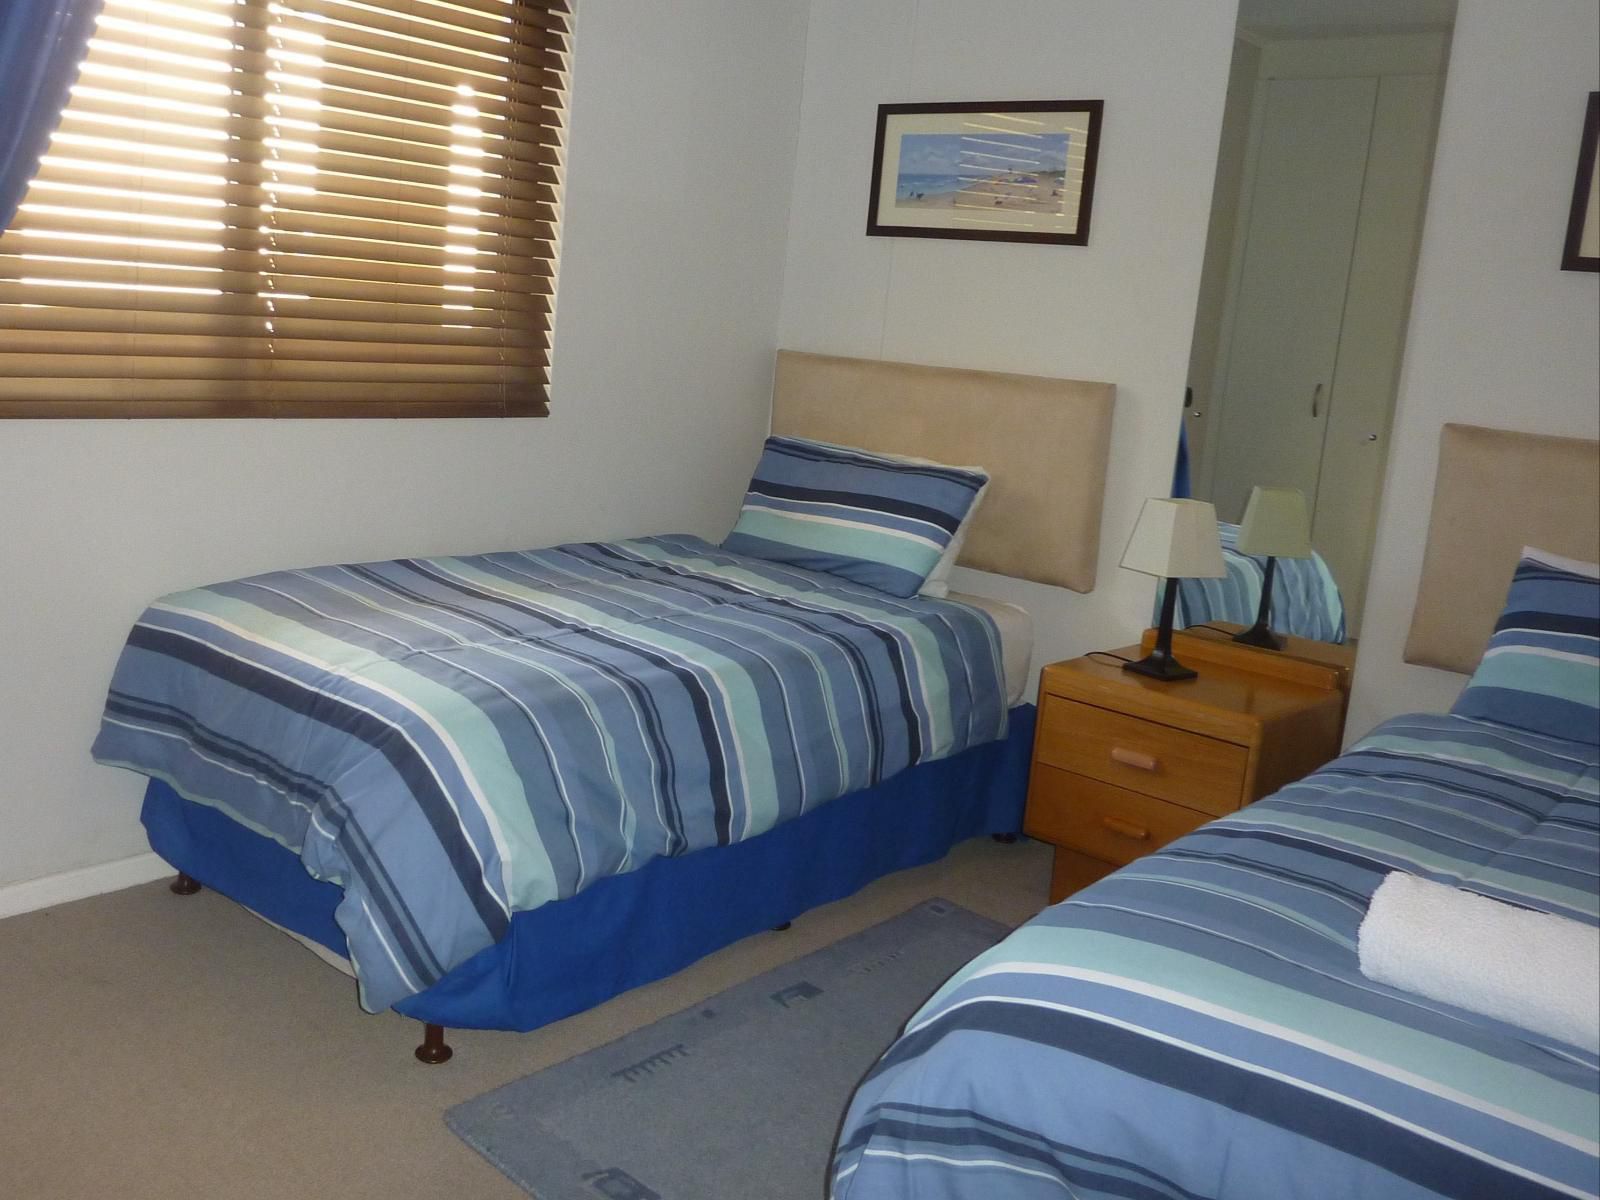 Majorca Self Catering Apartments Century City Cape Town Western Cape South Africa 